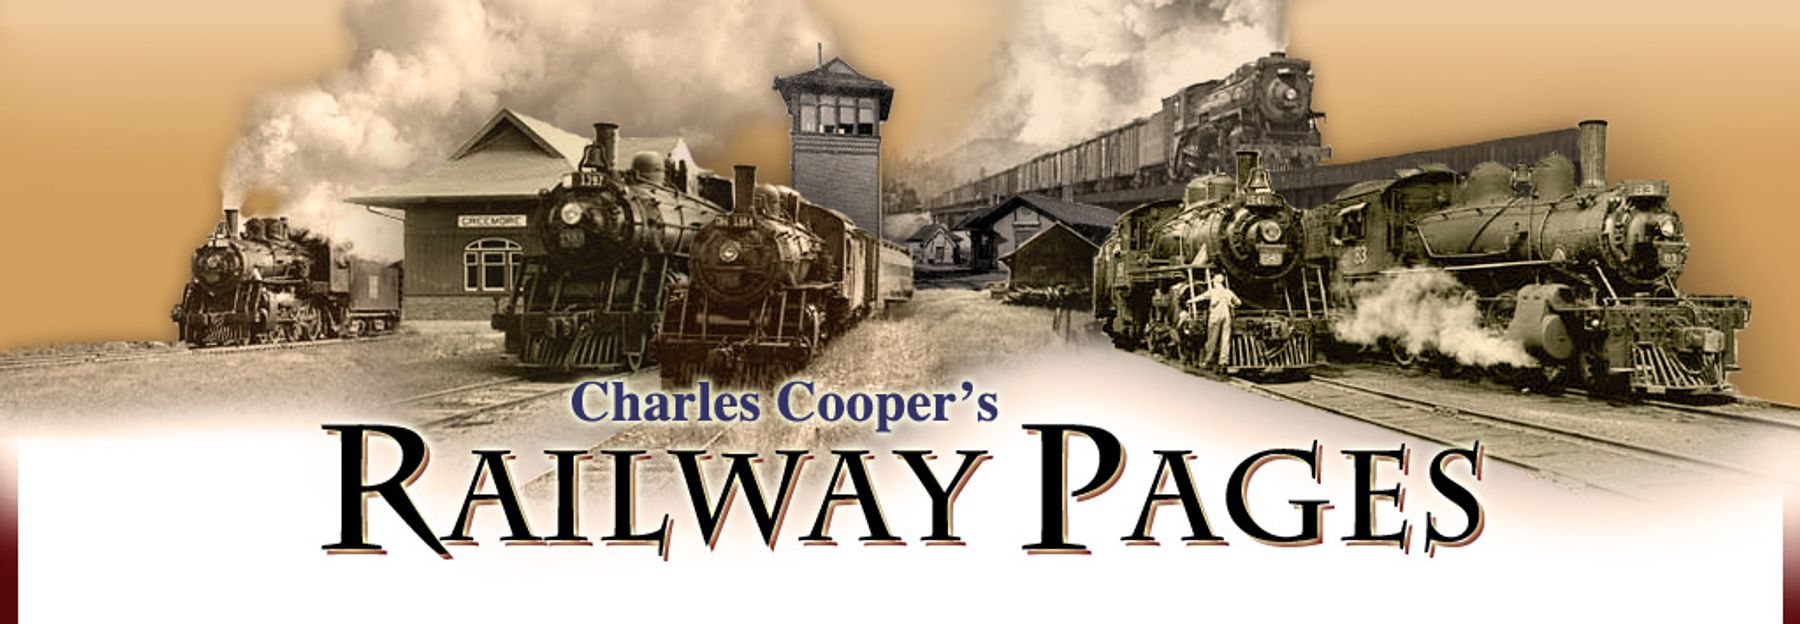 Charles Cooper's Railway Pages - Carl Riff's Railway History Diaries